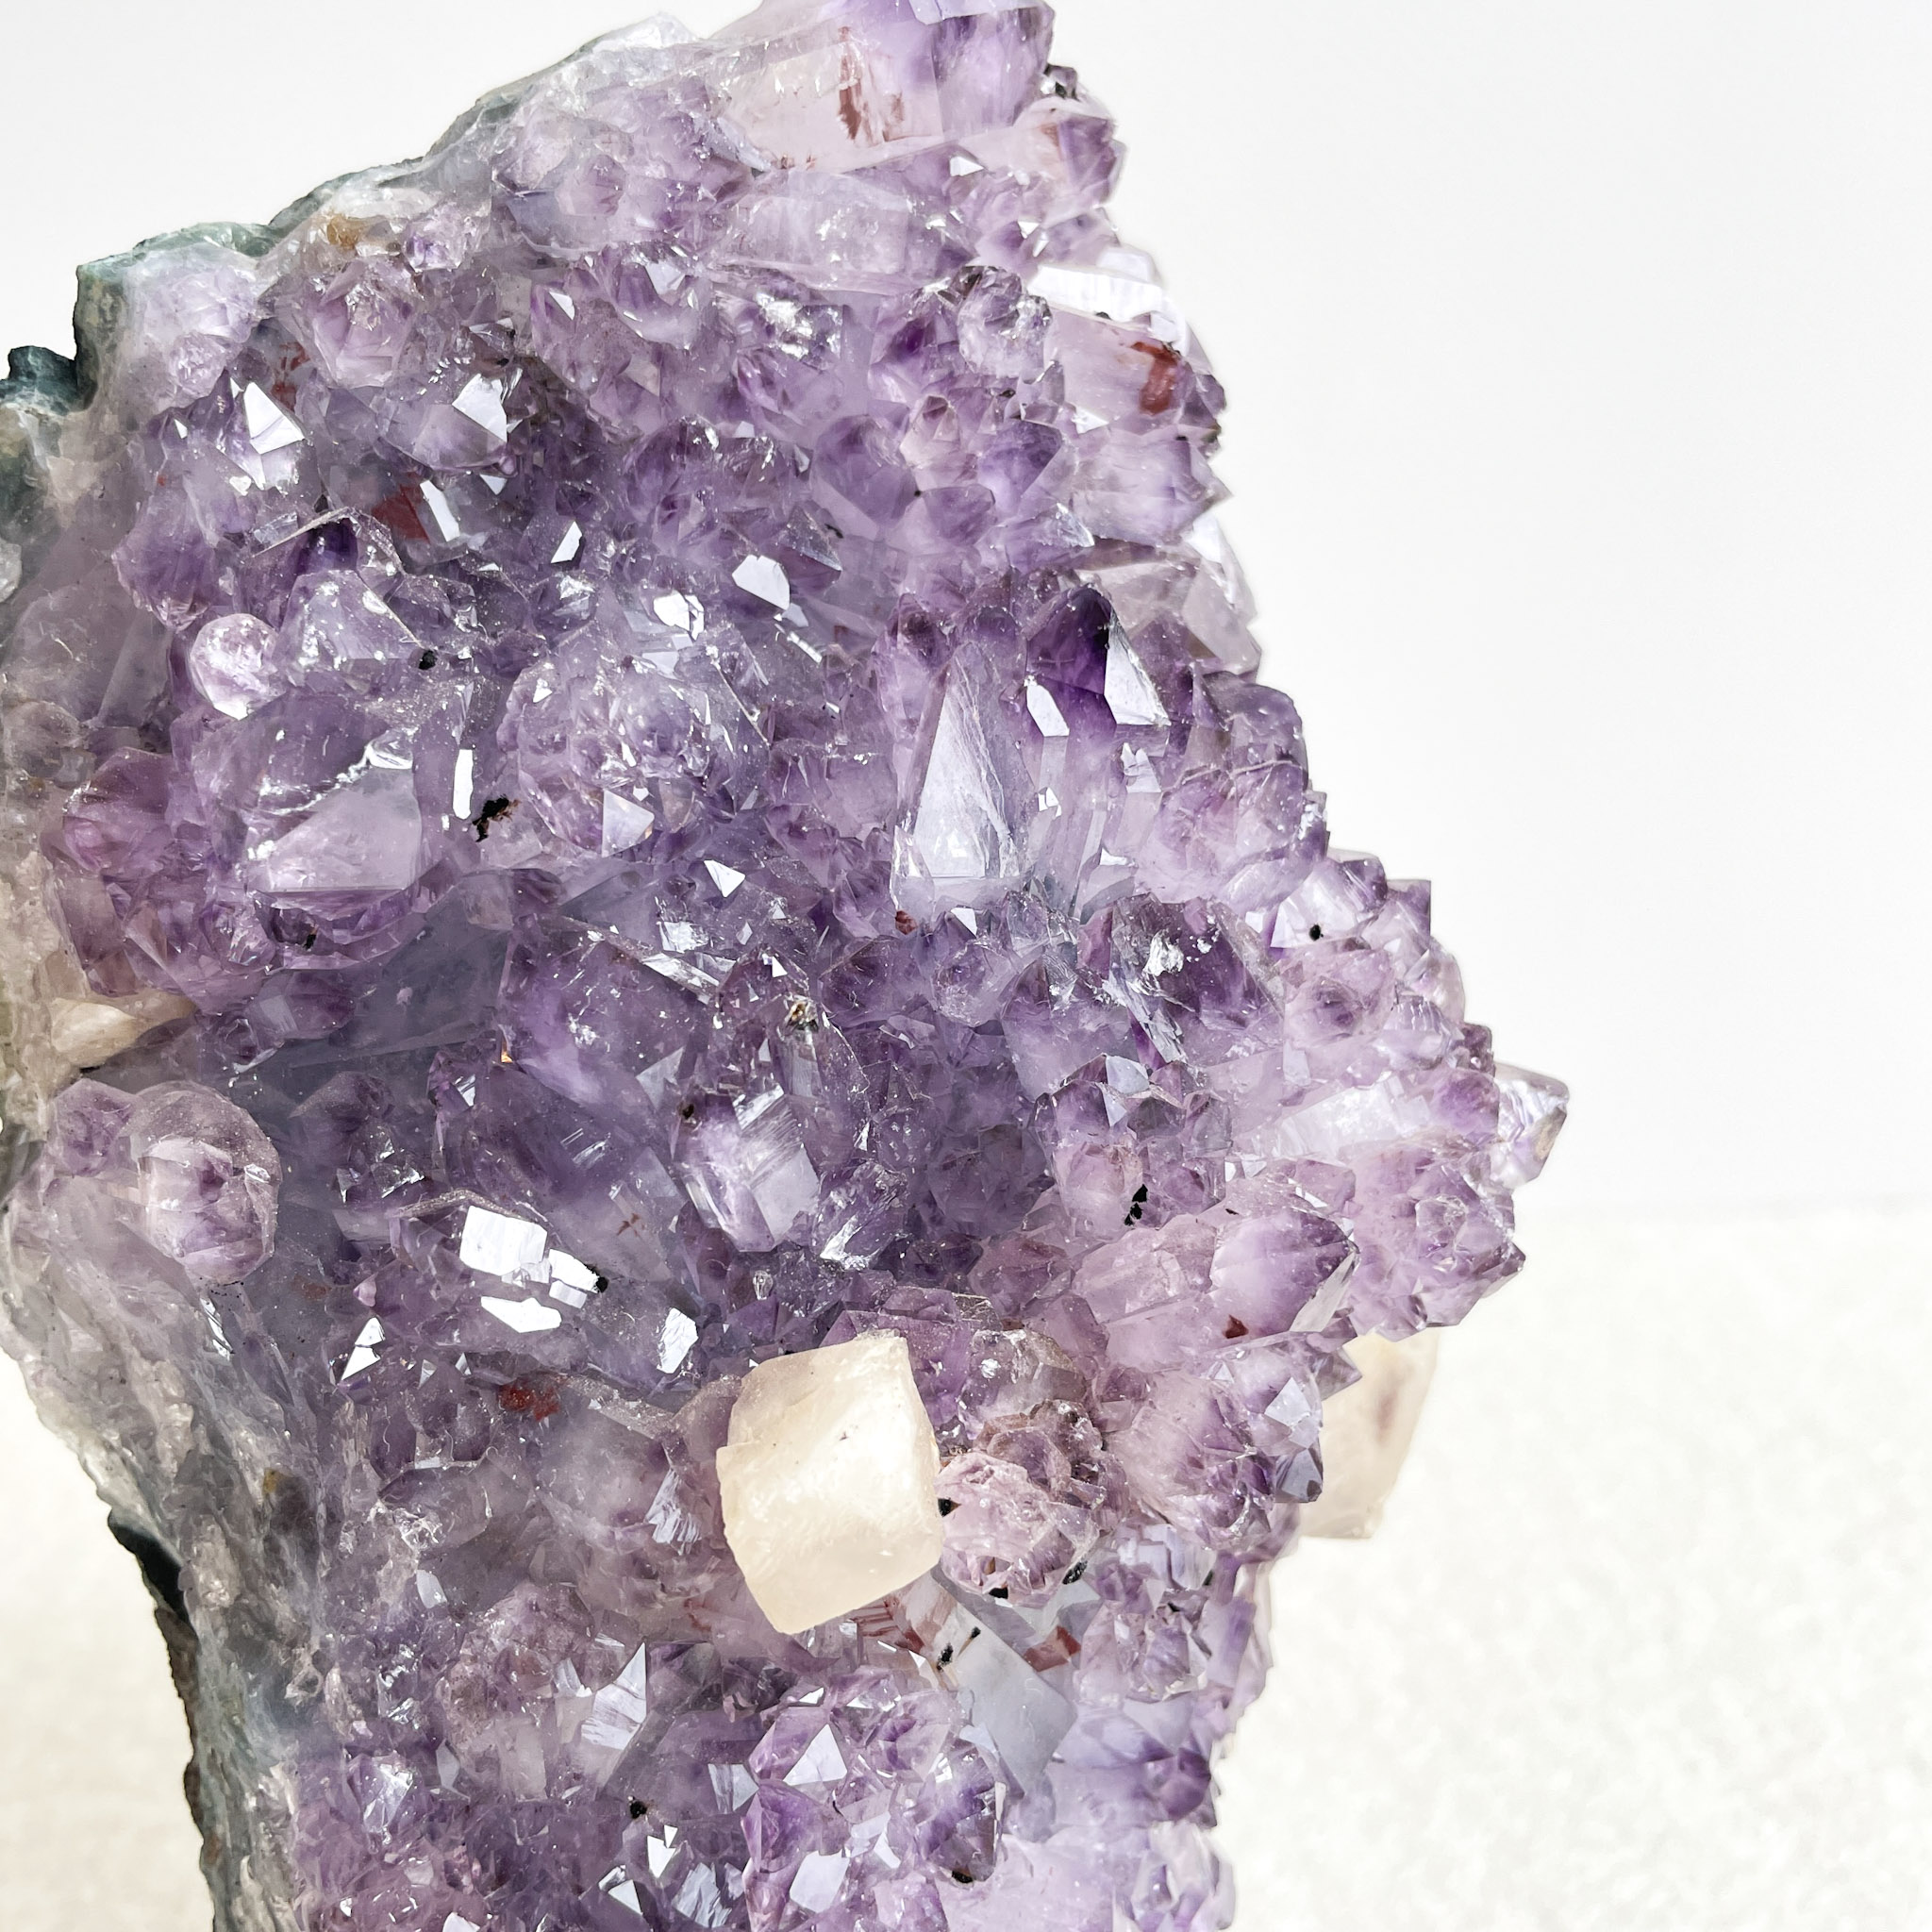 A close-up of a purple amethyst geode with sparkling crystal points on a light background.